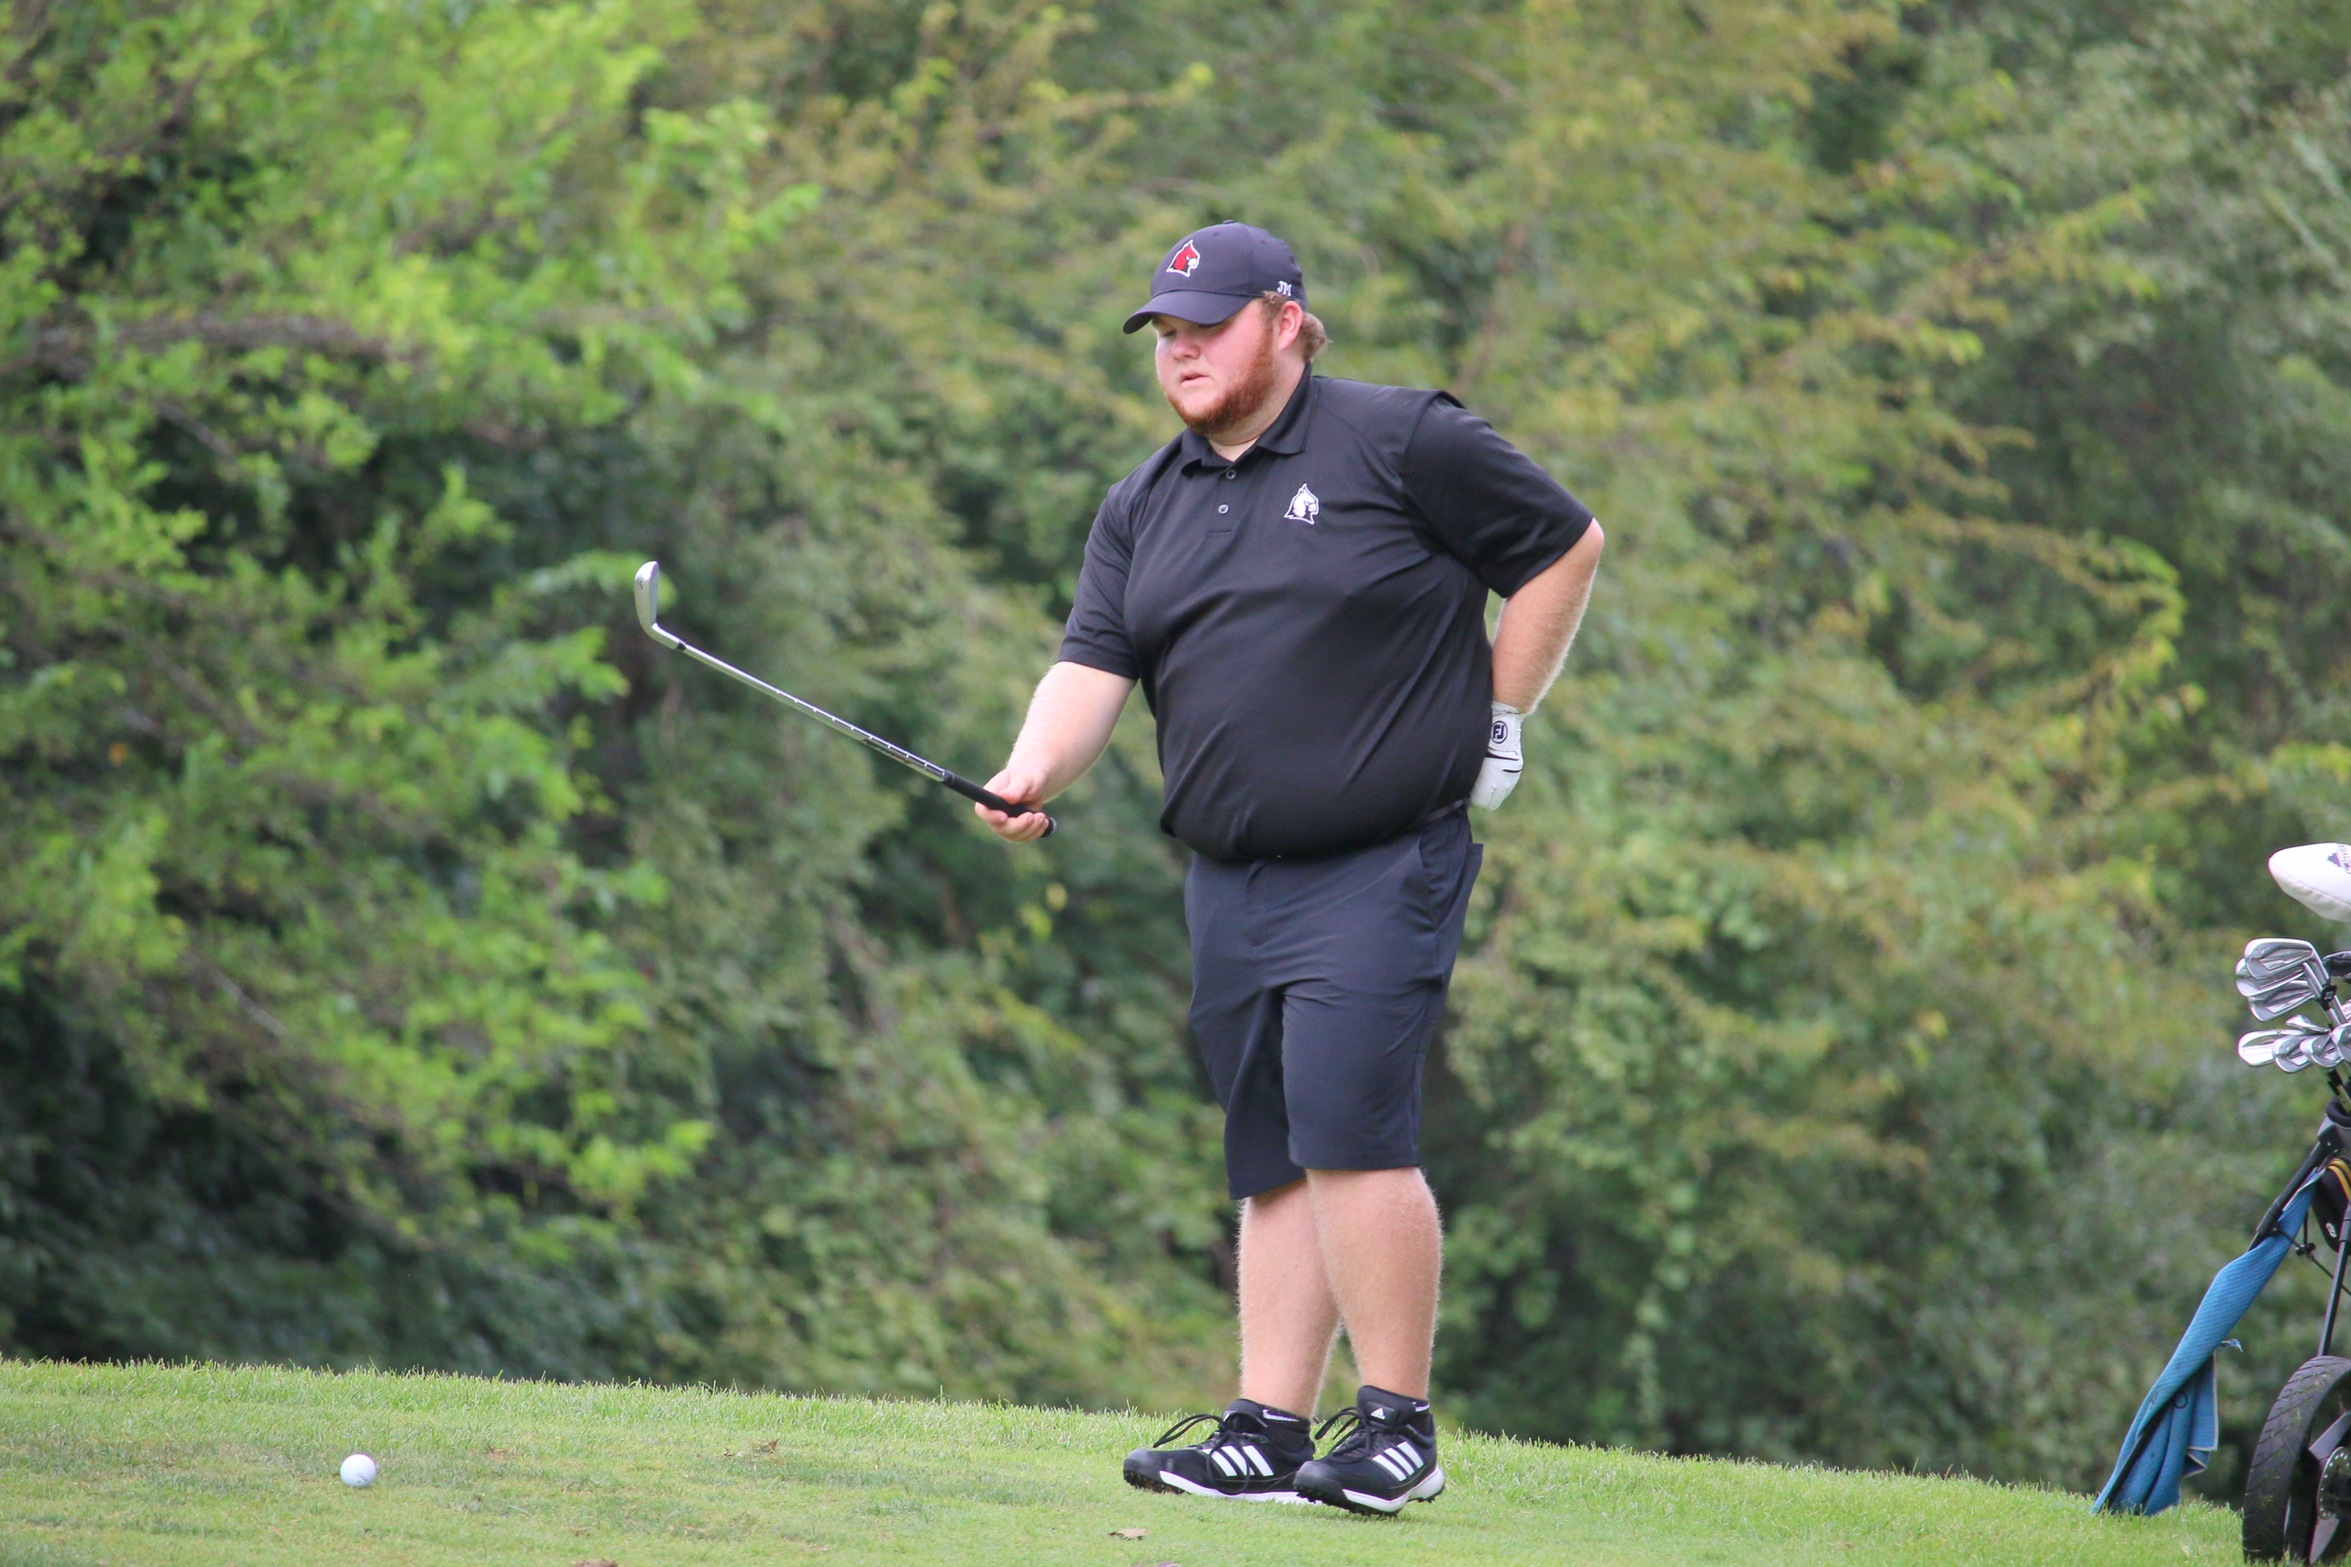 Men's Golf finishes up play at the Saints Classic